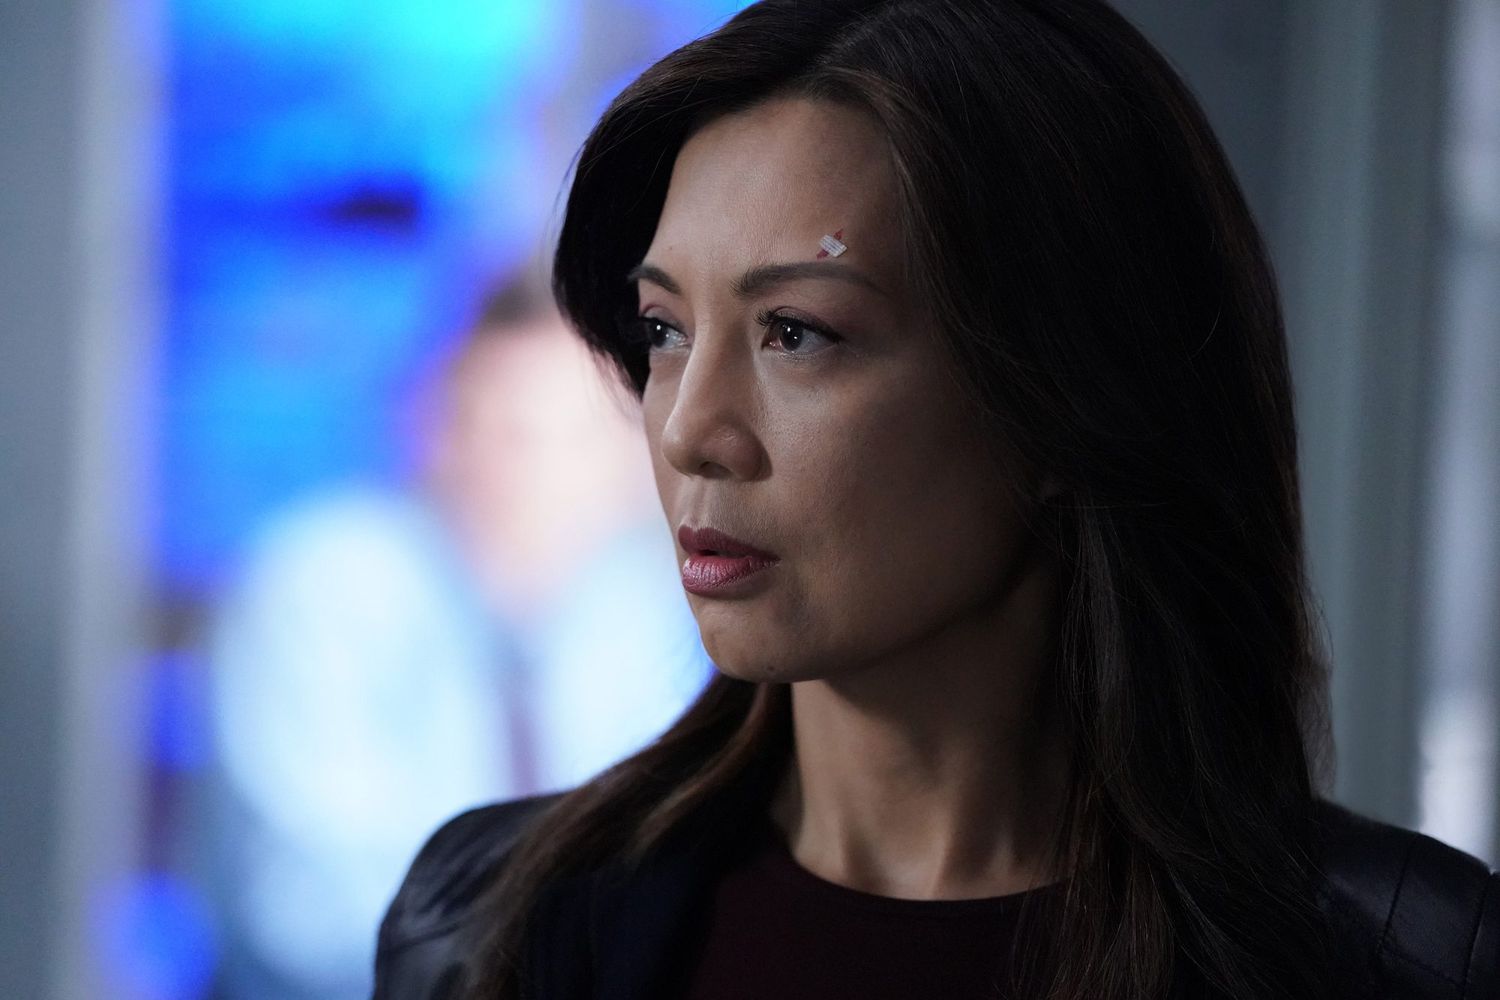 MARVEL'S AGENTS OF S.H.I.E.L.D. - "Missing Pieces" - Scattered across the galaxy, the team works to find their footing in the wake of losing Coulson in the spectacular Season 6 premiere of "Marvel's Agents of S.H.I.E.L.D.," FRIDAY, MAY 10 (8:00-9:00 p.m. EDT, on The ABC Television Network. (ABC/Mitch Haaseth) MING-NA WEN